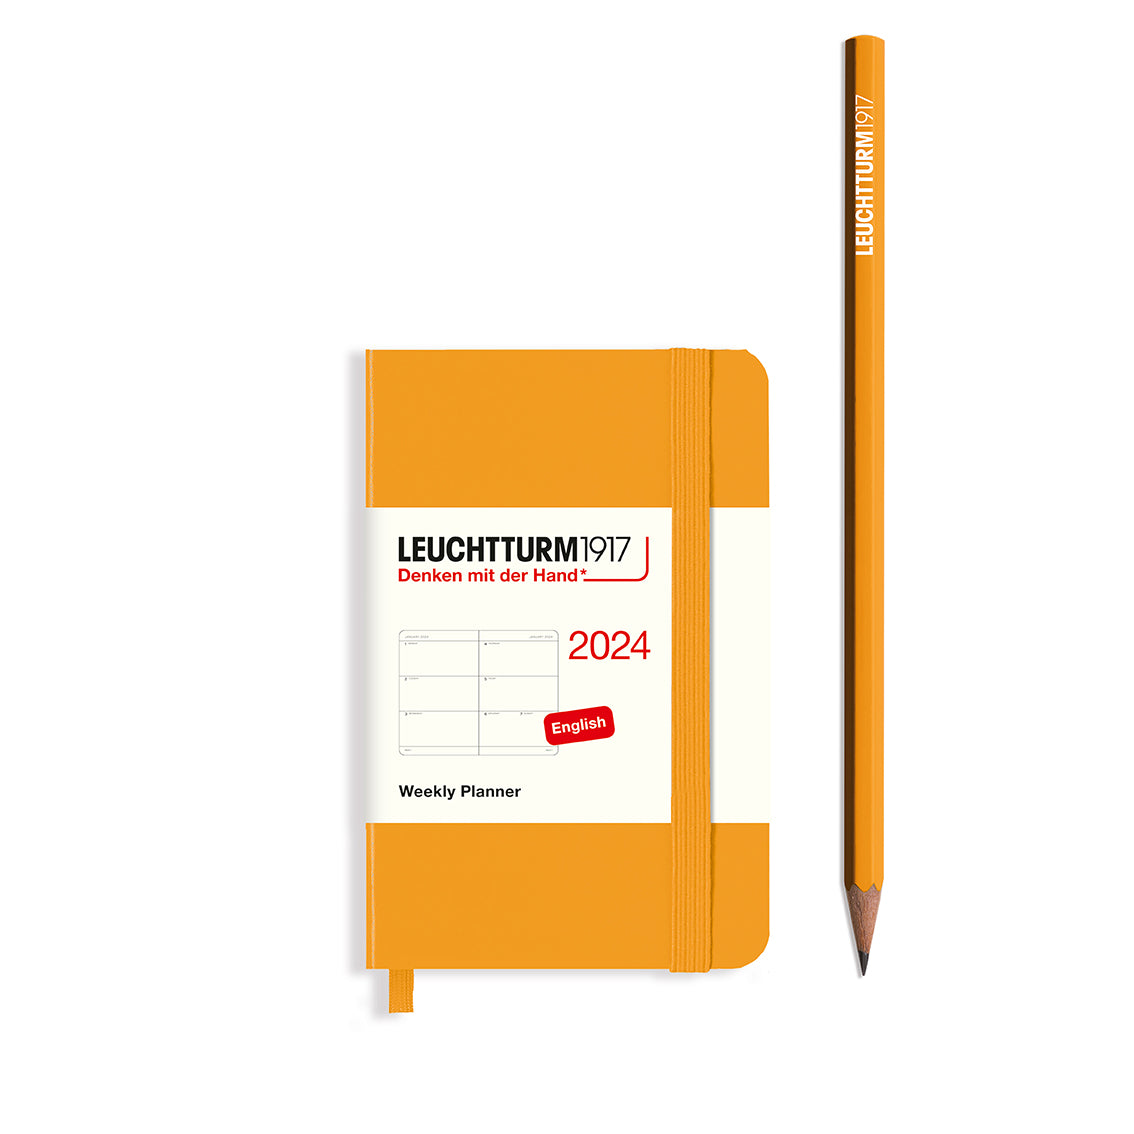 An image of an orange planner with an orange elastic band holding it together and a cream paper wrap around the middle stating the business name Leuchtturm1917, that it is for the year 2024, it is a weekly planner, is A7 in size and an English language version. It has an image on the wrap showing the inside layout which is a week spread across 2 pages. An orange pencil is shown at the side of the planner.